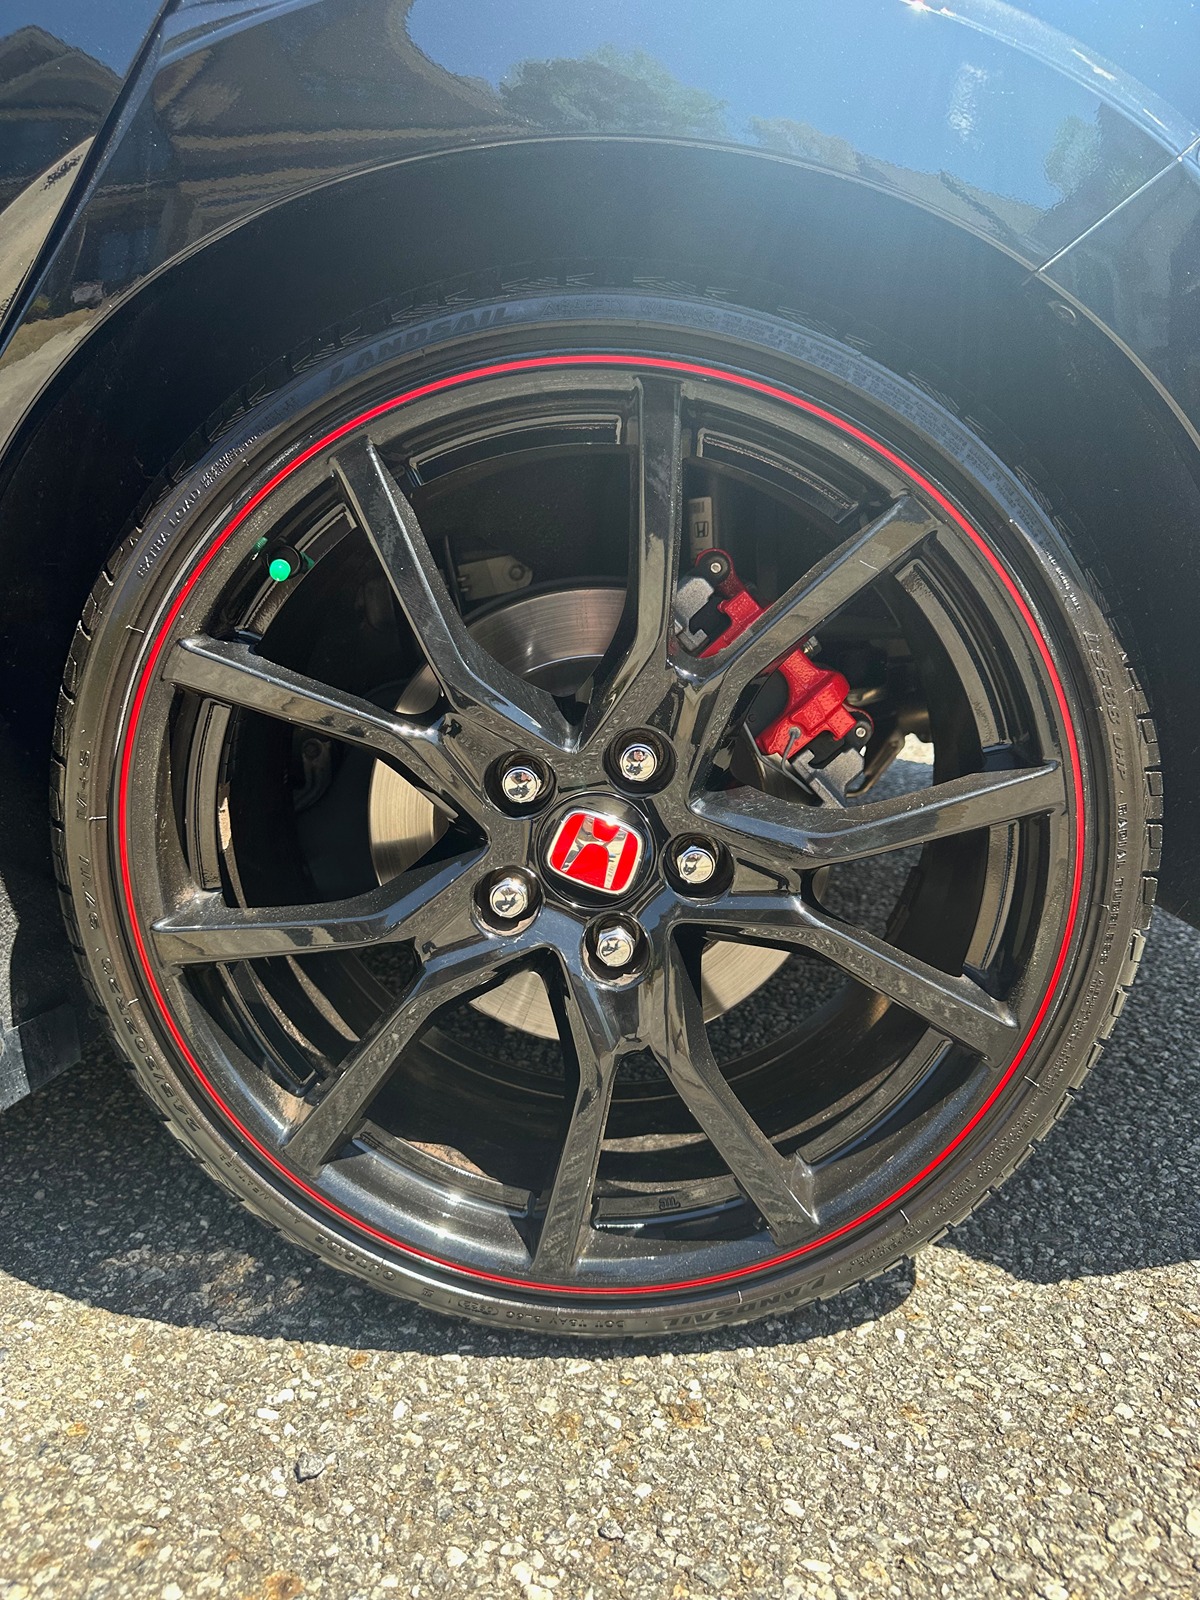 Honda Civic 10th gen Sold. 2019 Civic Type R for sale IMG_8149